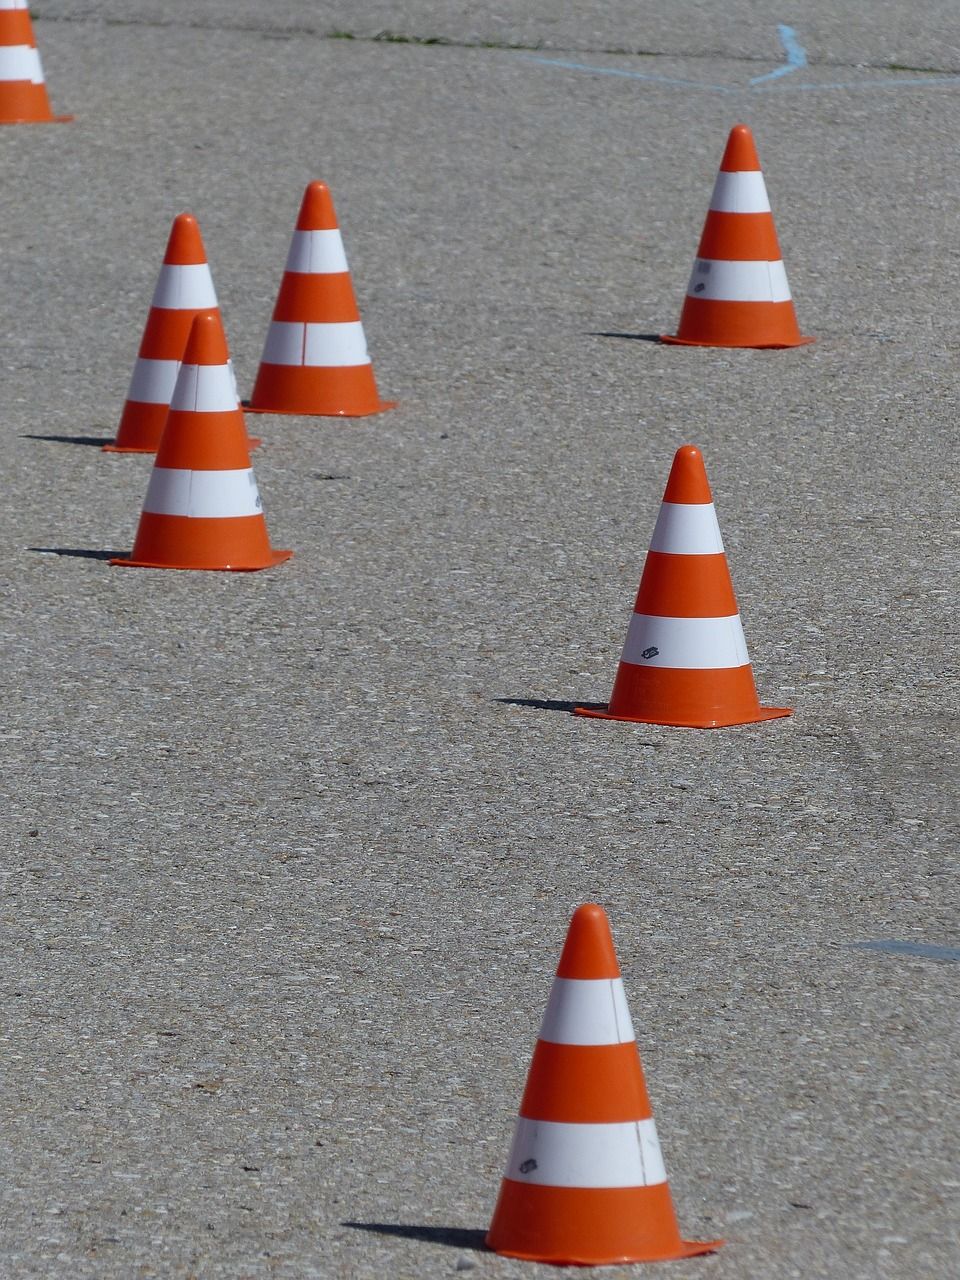 Traffic cones laid out on the ground for a zig zag bike course